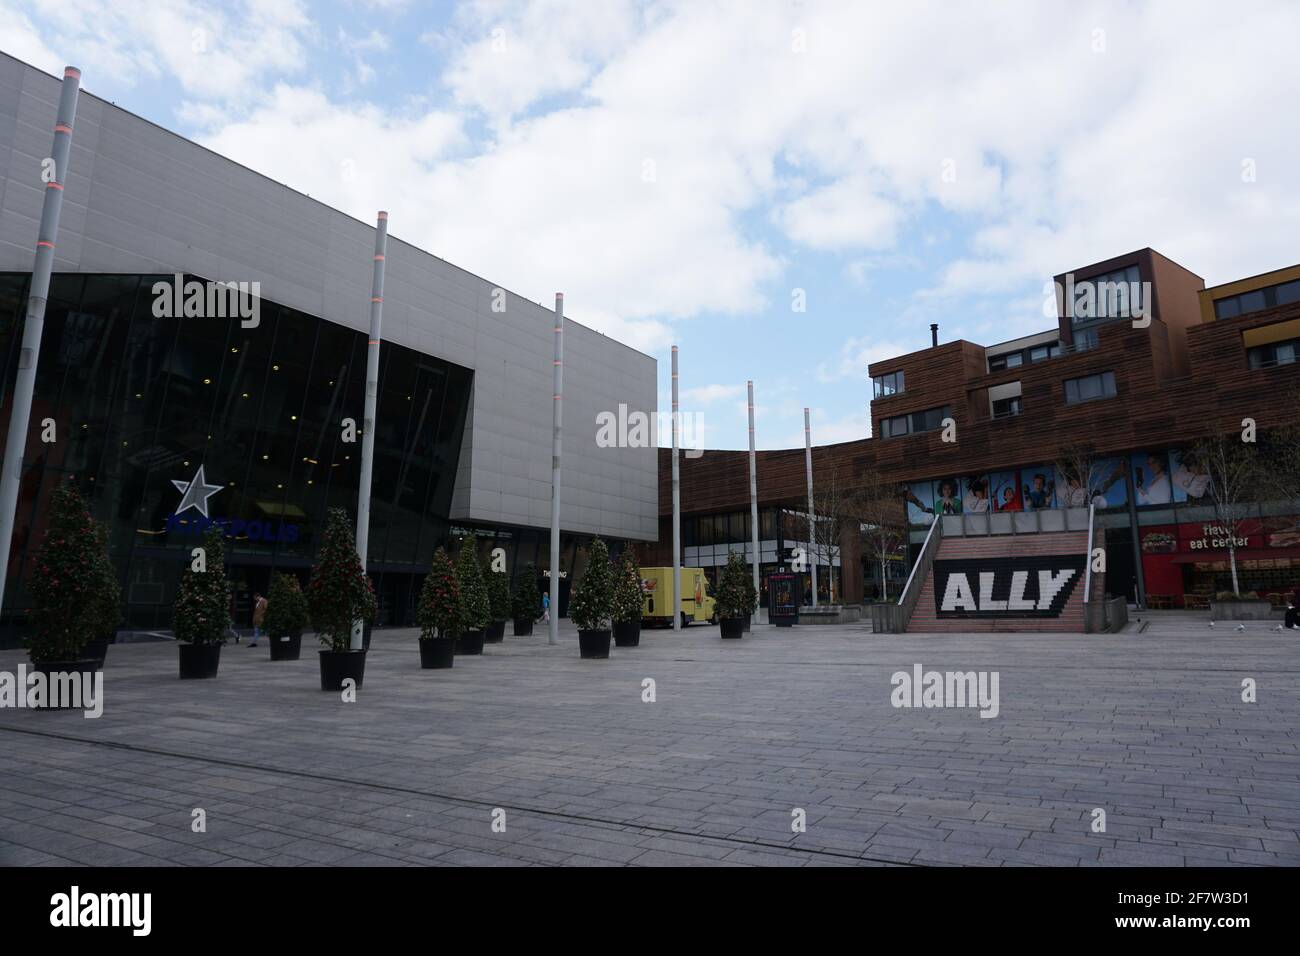 ALMERE, NETHERLANDS - Apr 12, 2019: Square in the city center of Almere, The Netherlands. The square is called 'forum'. Stock Photo